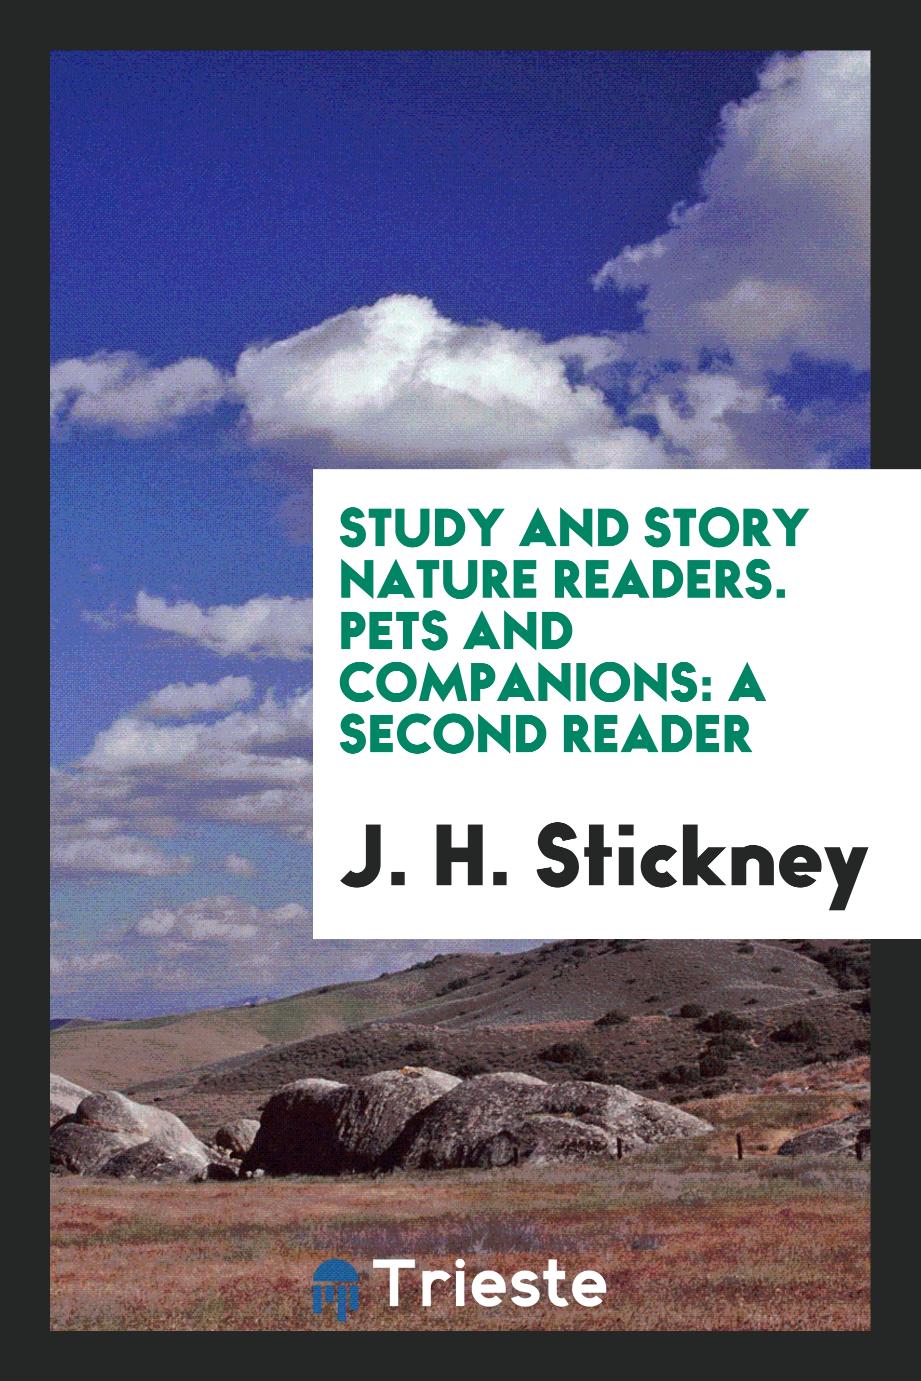 Study and Story Nature Readers. Pets and Companions: A Second Reader